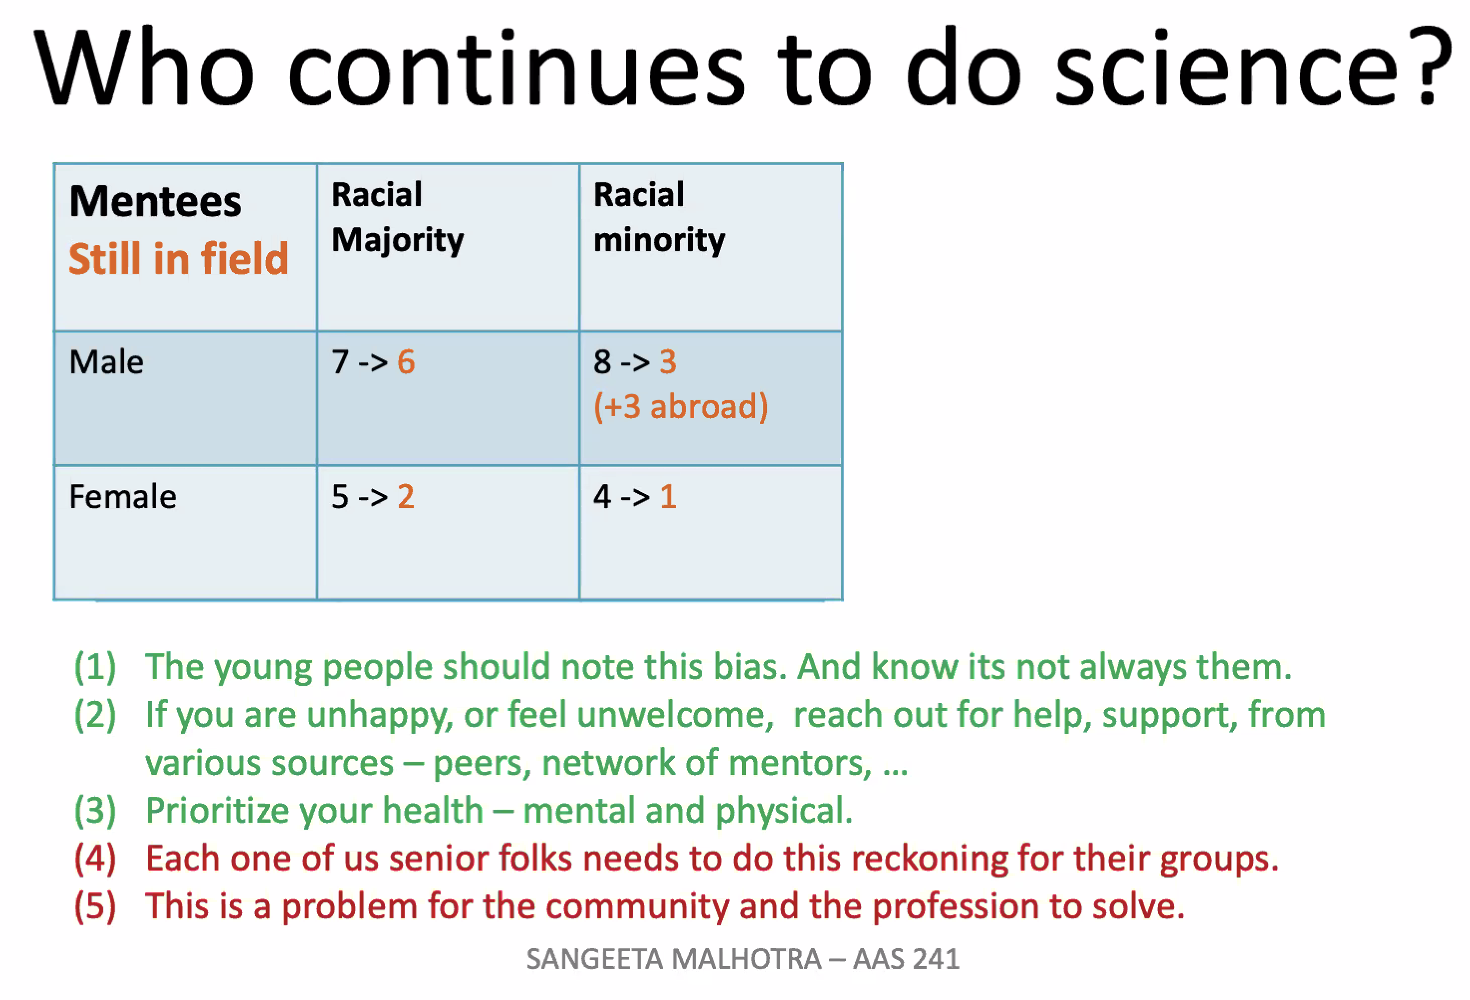 Who continues to do science? a table with four cells summarizing number of mentees --> the ones still in the field. Male/Racial majority: 7->6, Male/Racial minority: 8->3(+3 abroad), Female/Racial majority: 5->2, Female/Racial minority: 4->1. The takeaways: 1. Young people should note this bias and know it's not always their fault. 2. If you are unhappy, or feel unwelcome, reach out for help from peers, mentors. 3. Prioritize your mental and physical health. 4. Senior folks need to do this reckoning for their groups. 5. This is a problem for the community and the profession to solve.